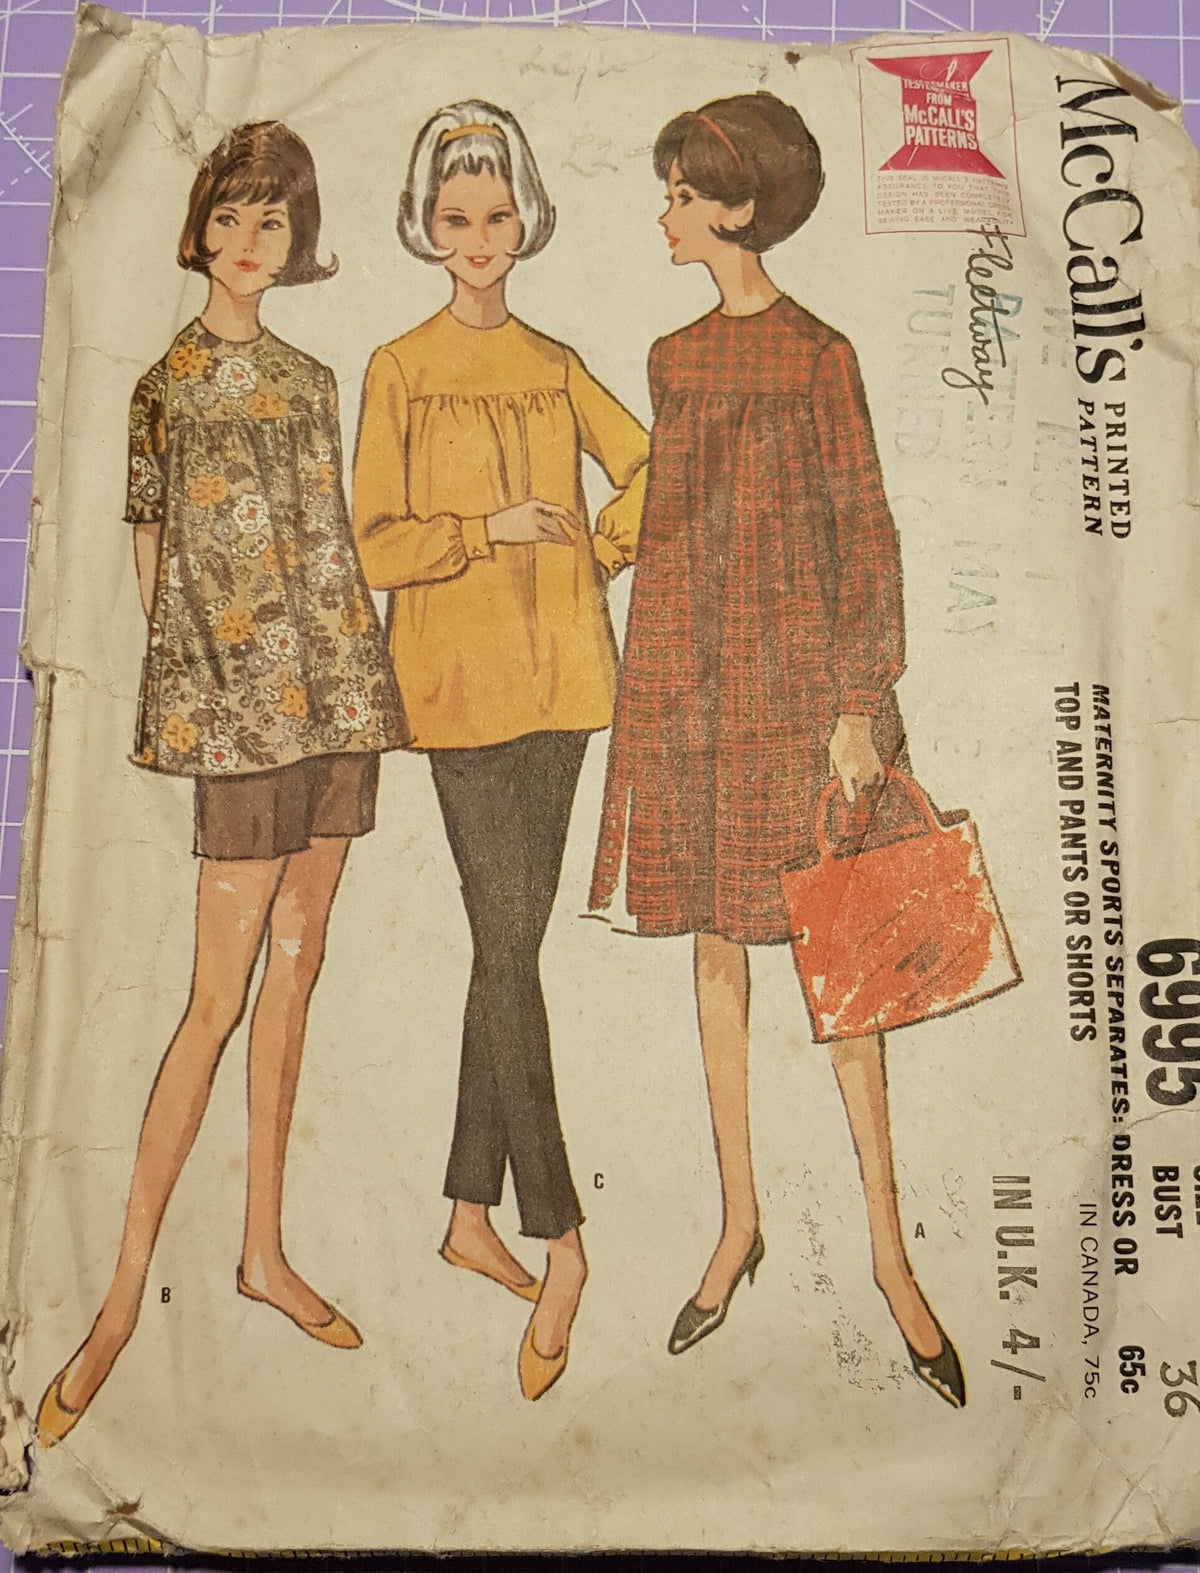 Vintage McCalls Pattern - 6996 - Maternity Sports Separates - Size 16 - Published 1963 - Used